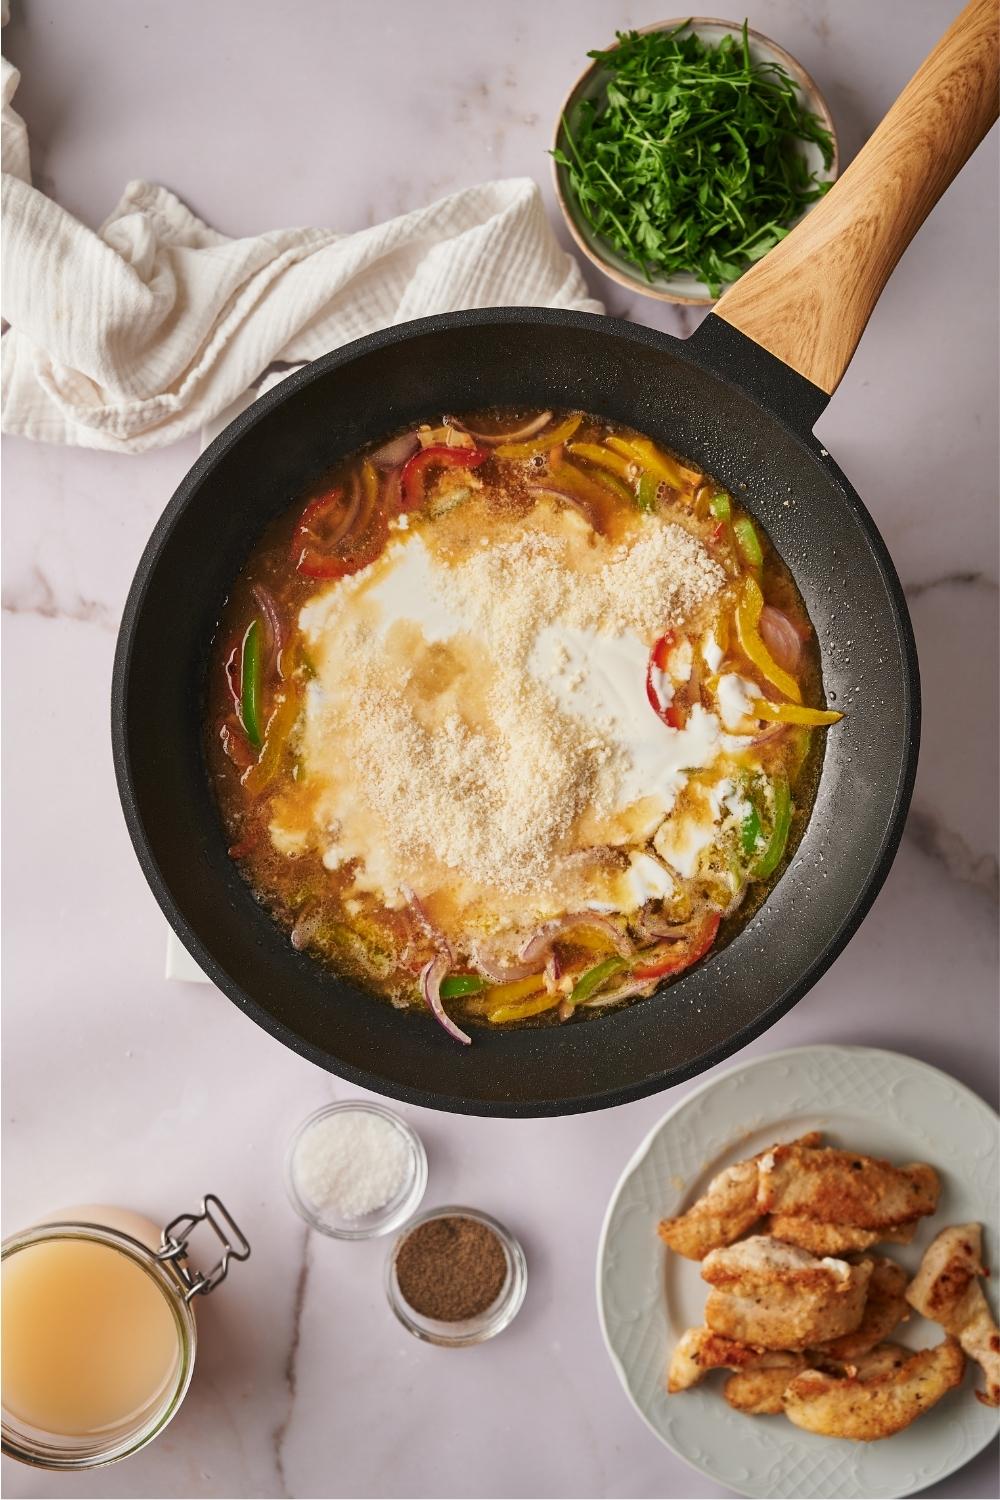 A skillet containing cooked bell pepper and red onion with scampi sauce ingredients and parmesan cheese freshly added to the skillet. Surrounding the skillet are plates and bowls containing ingredients such as cooked chicken, salt, pepper, and parsley.